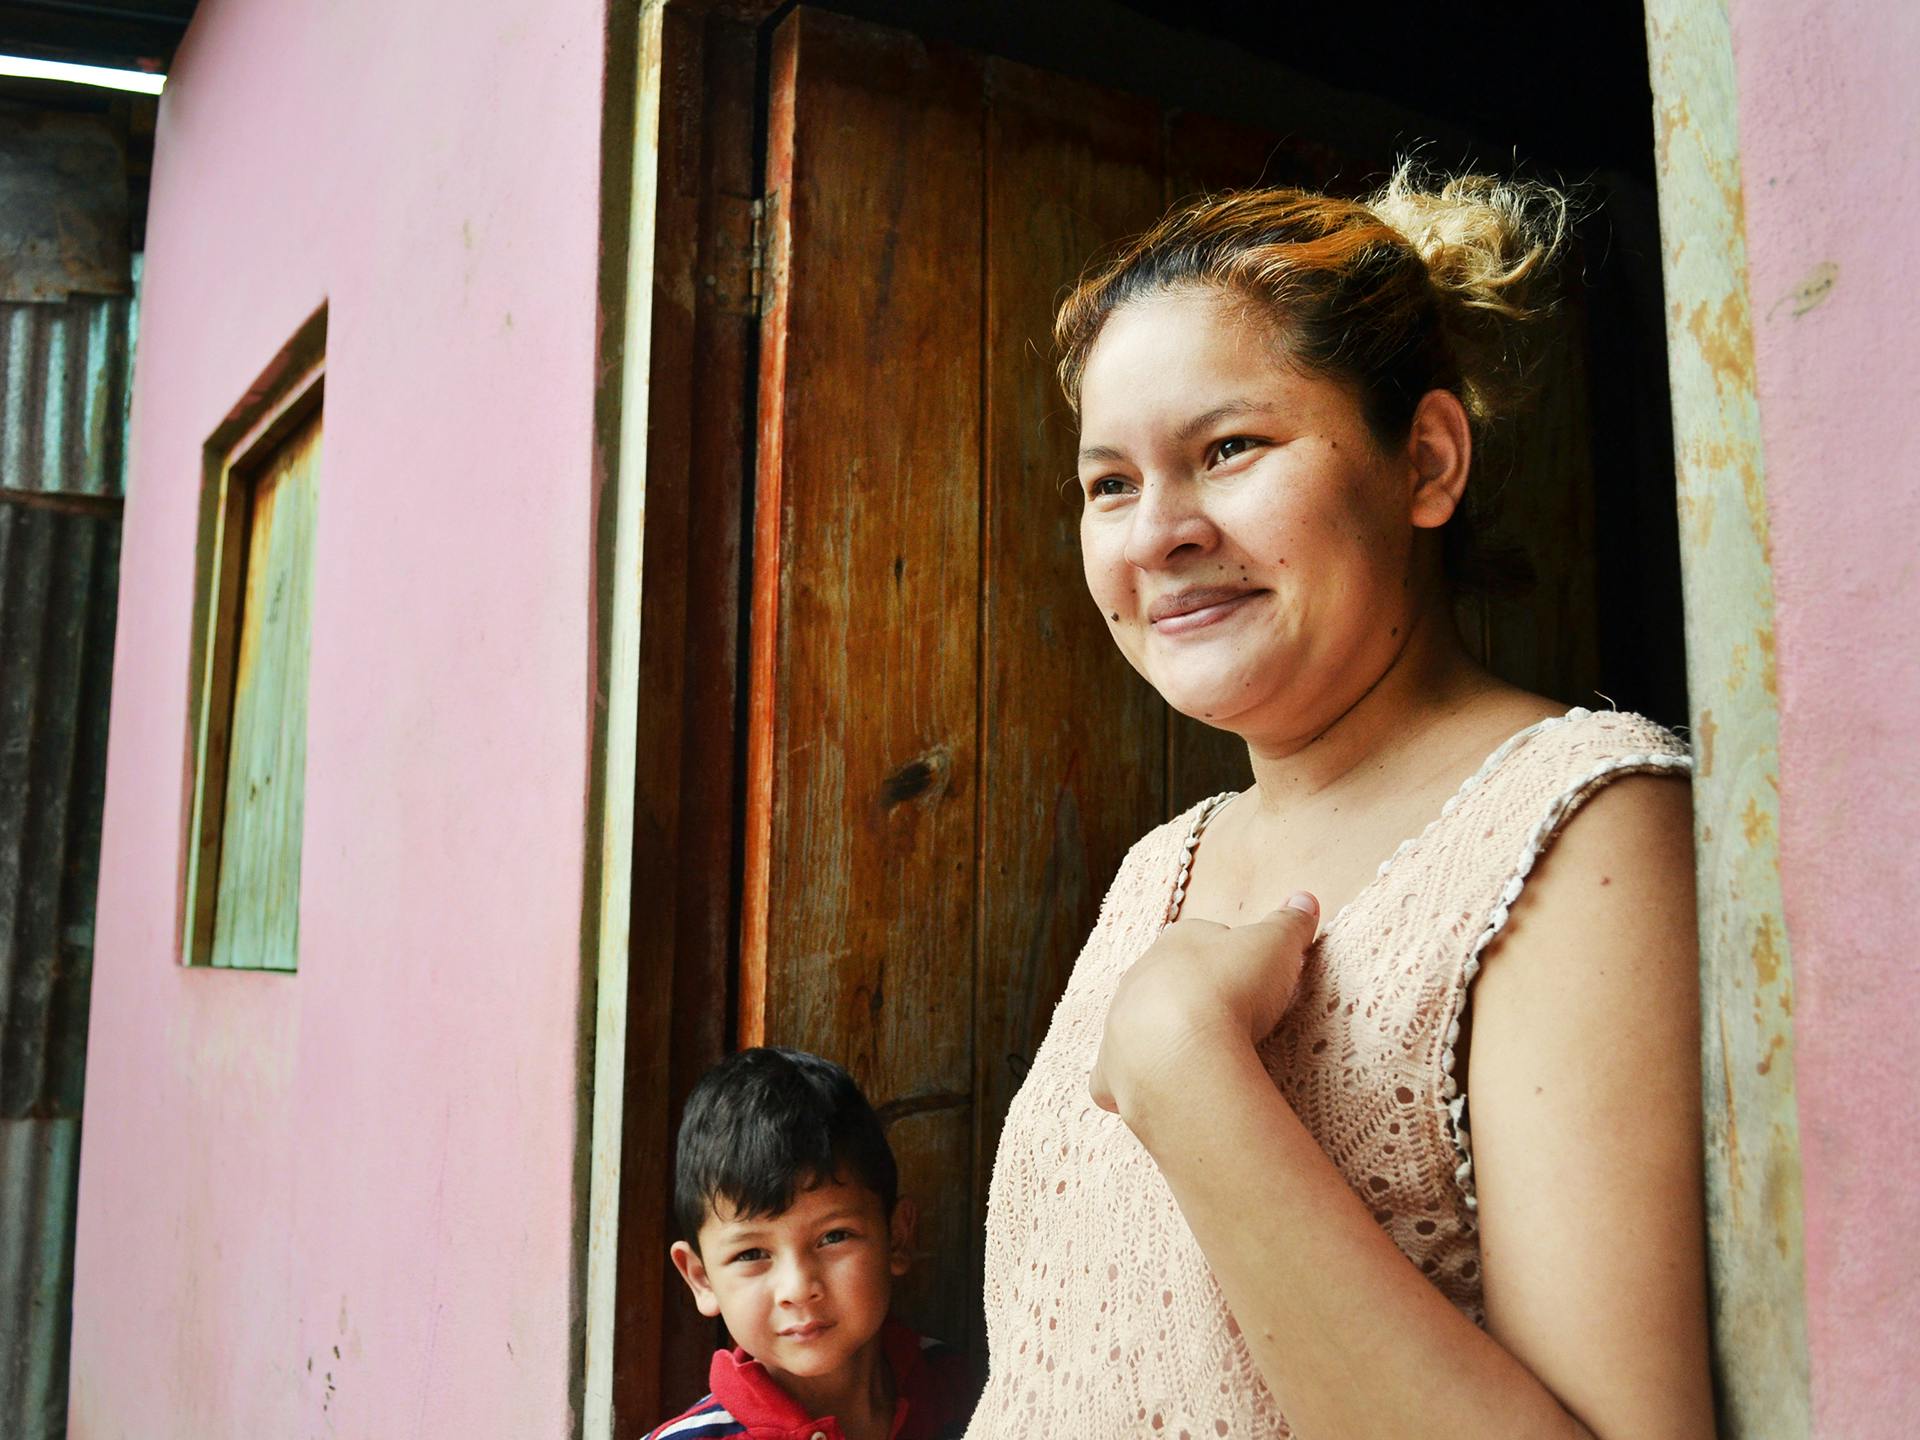 A woman looking out a door and smiling. Next to her is a child.